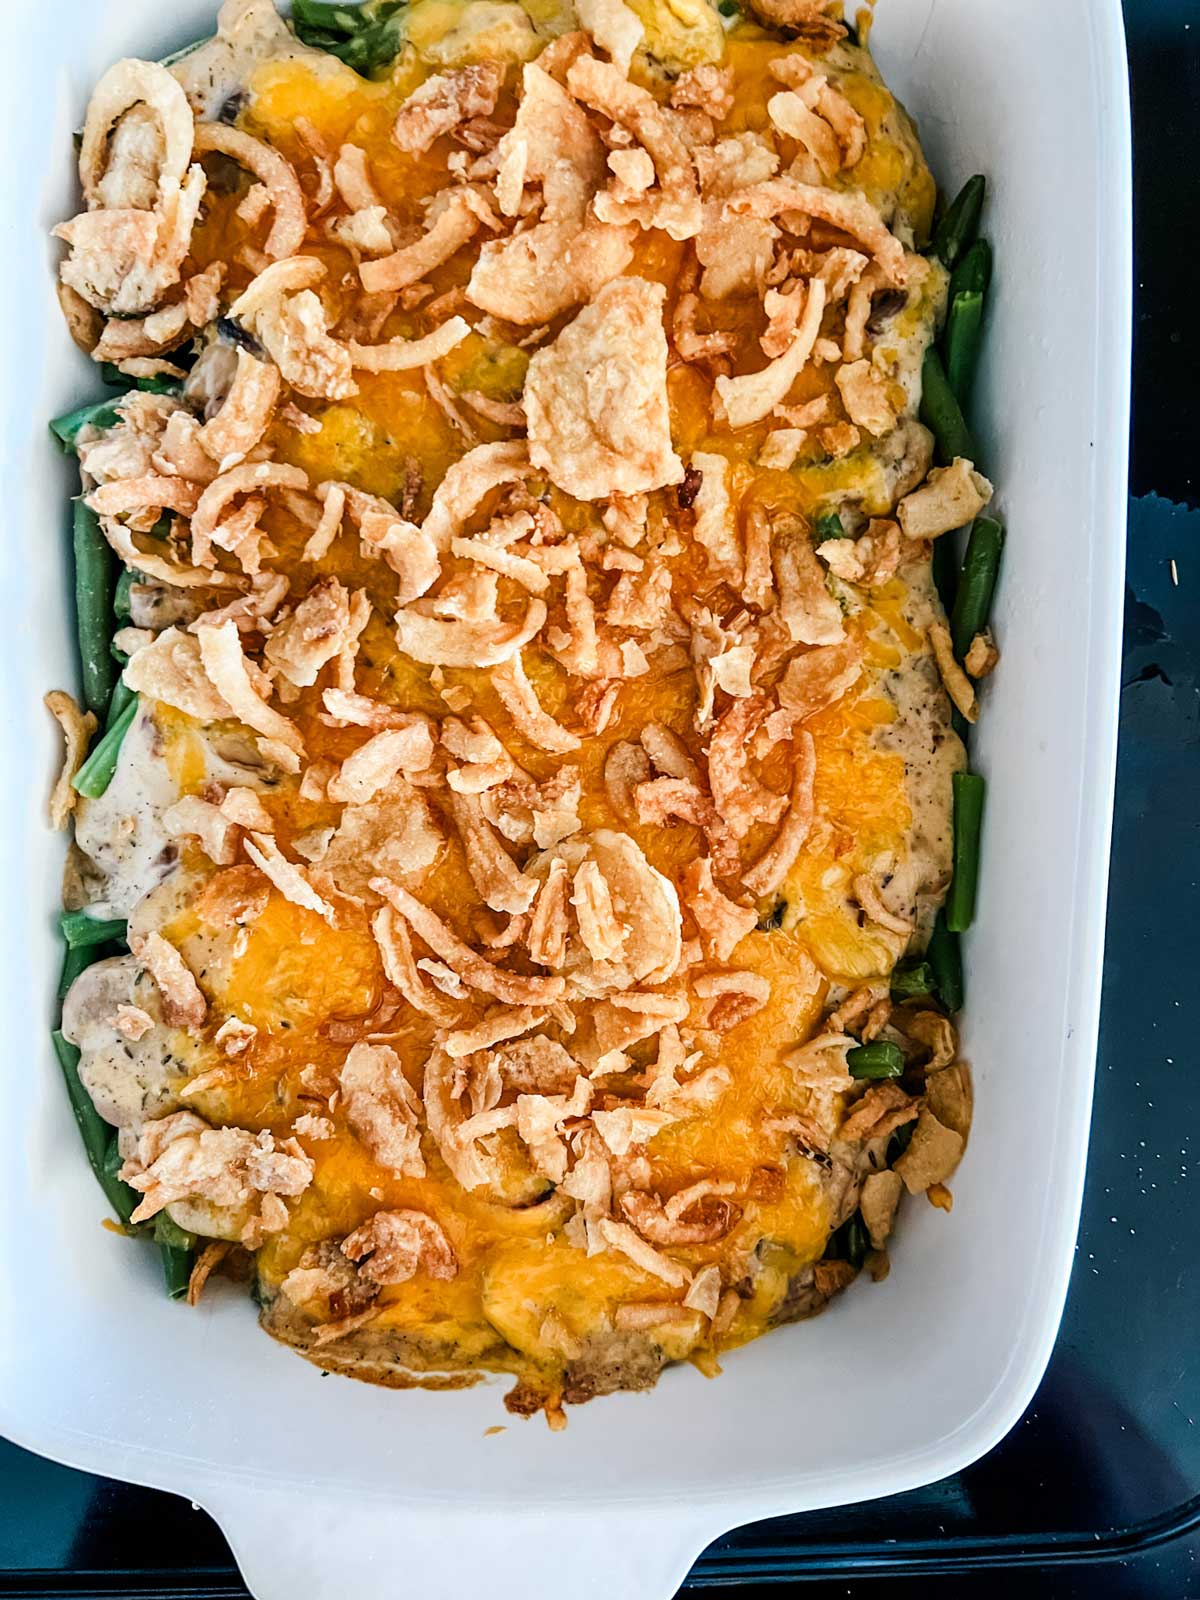 Green bean casserole with crispy fried onions on top.